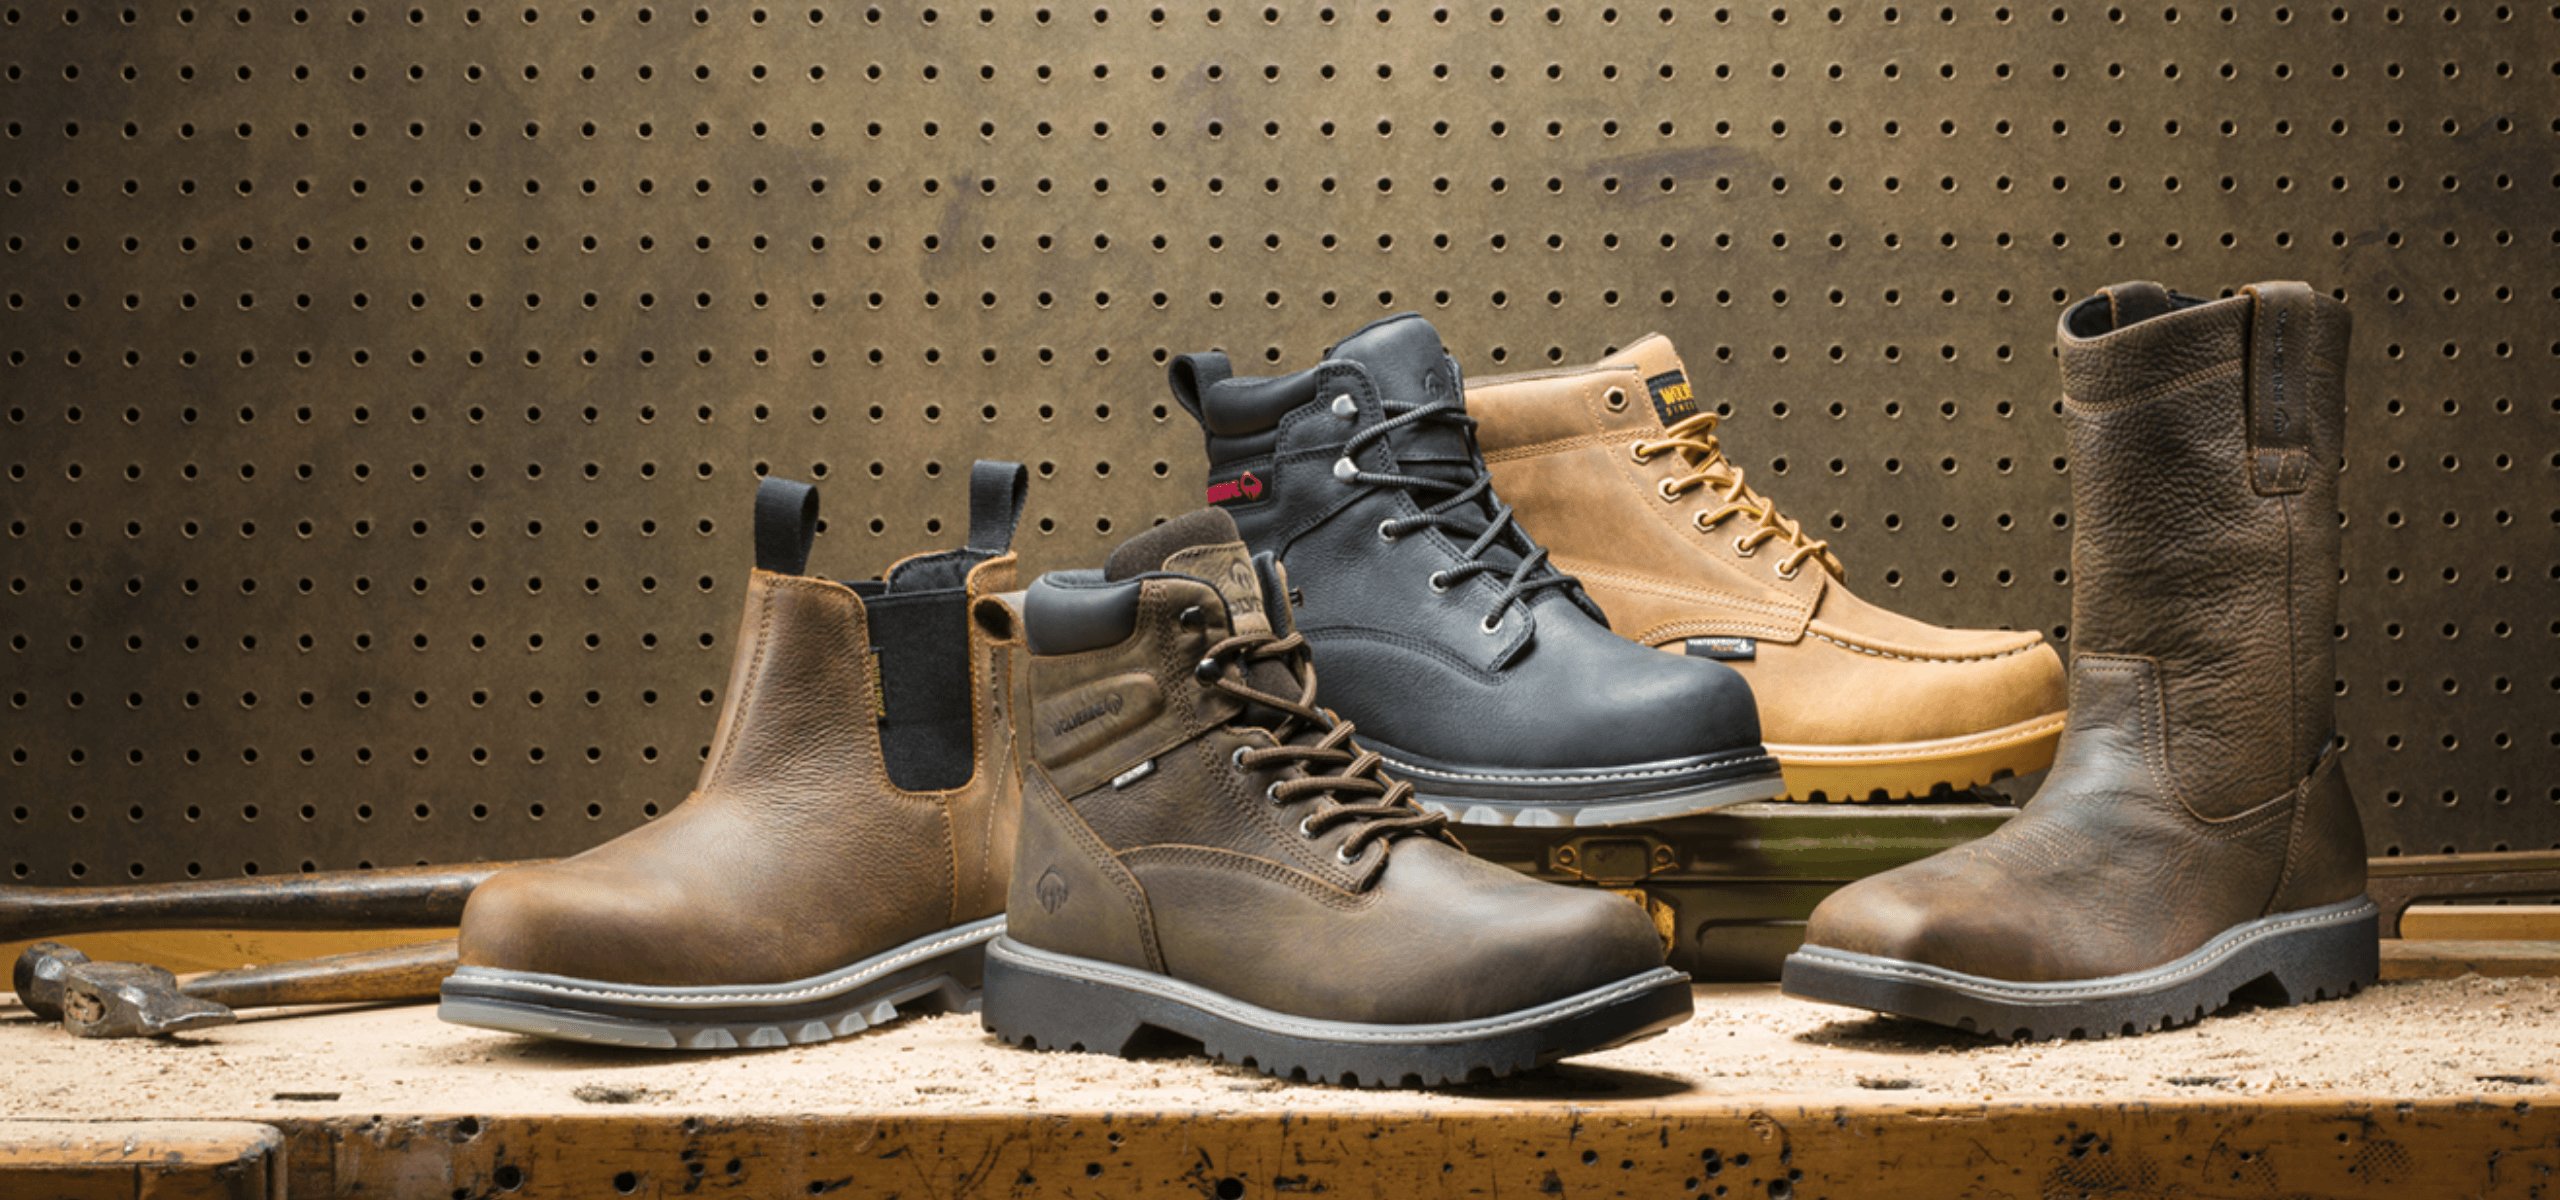 Various work boots on work bench